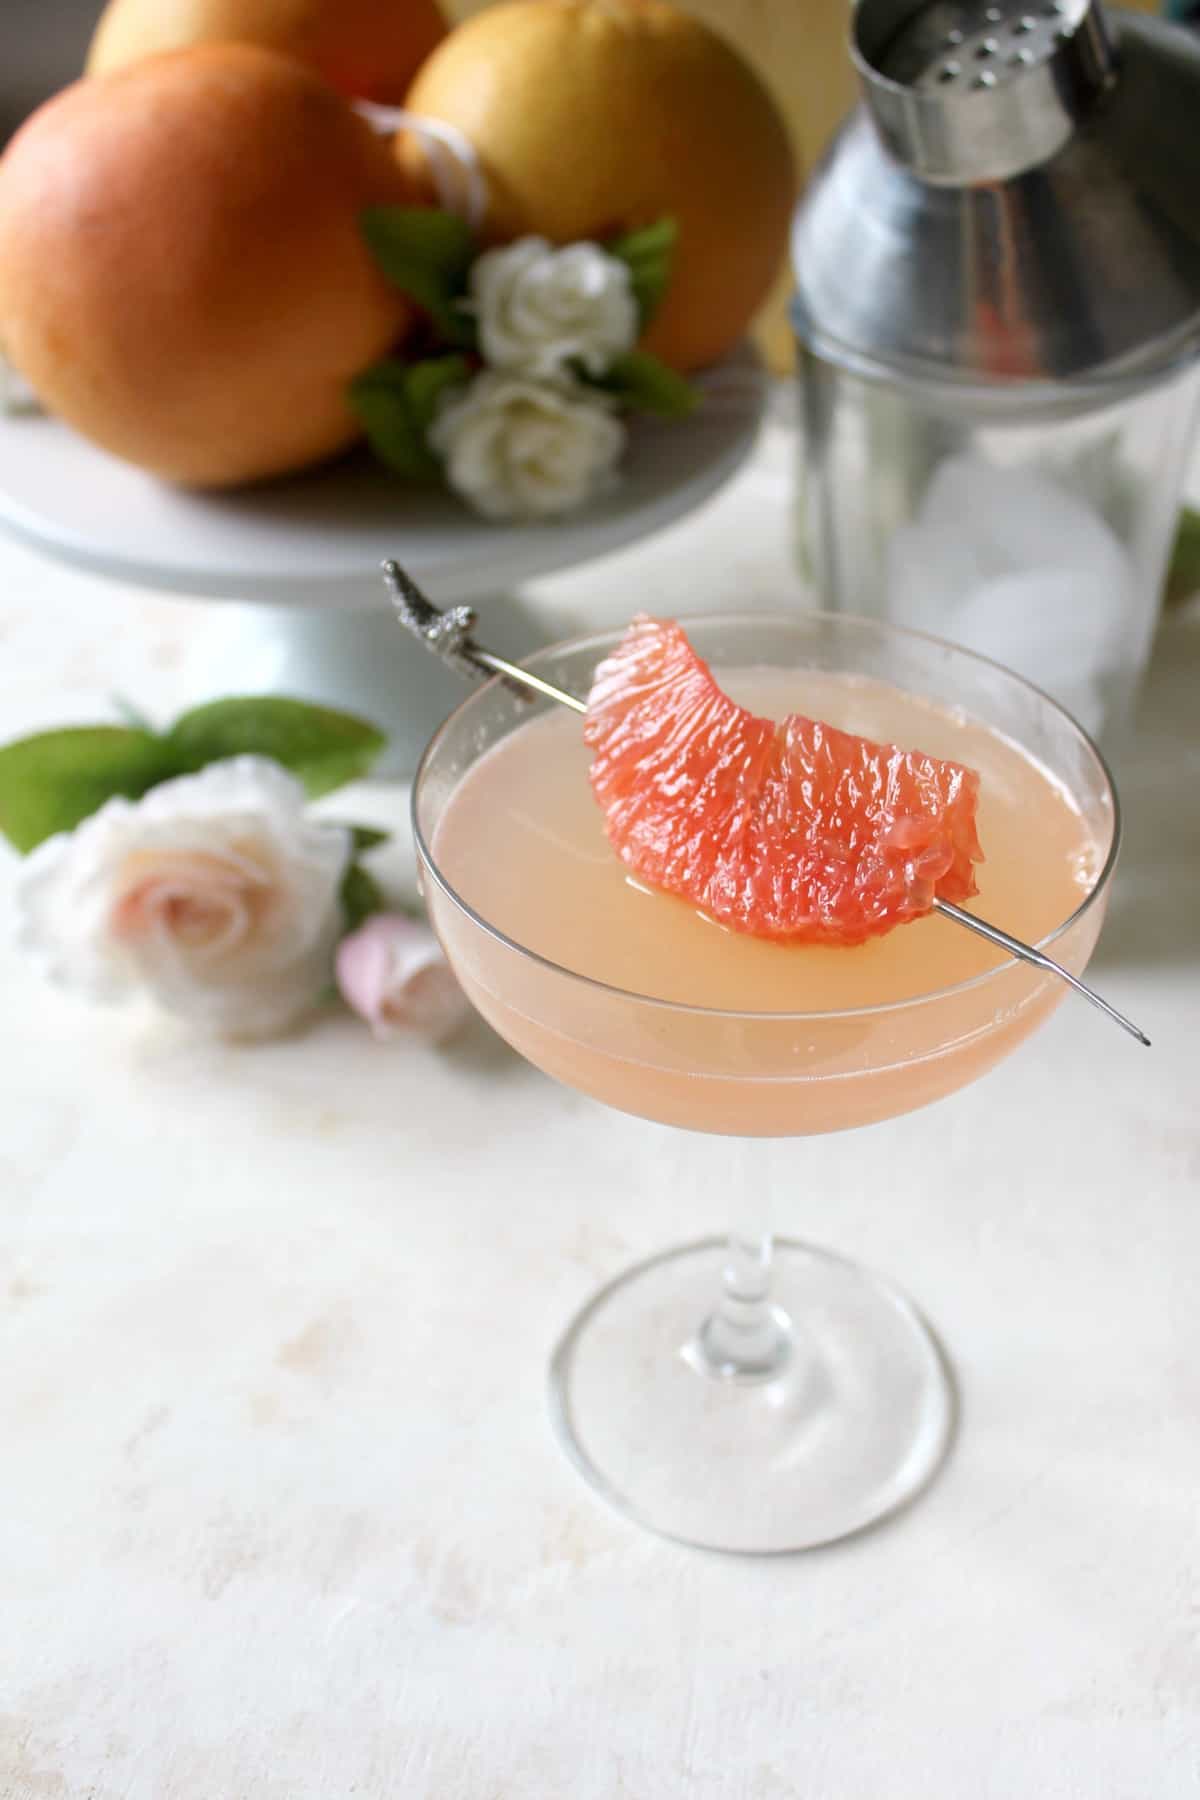 This Grapefruit Ginger Cocktail makes a refreshing elixir with a mildly spicy zing. Fresh squeezed grapefruit juice lends citrusy sweetness to the drink, while ginger beer gives the unassuming beverage effervescence and a touch of heat. Mix it up to sip on for a special celebration or a weekend treat!